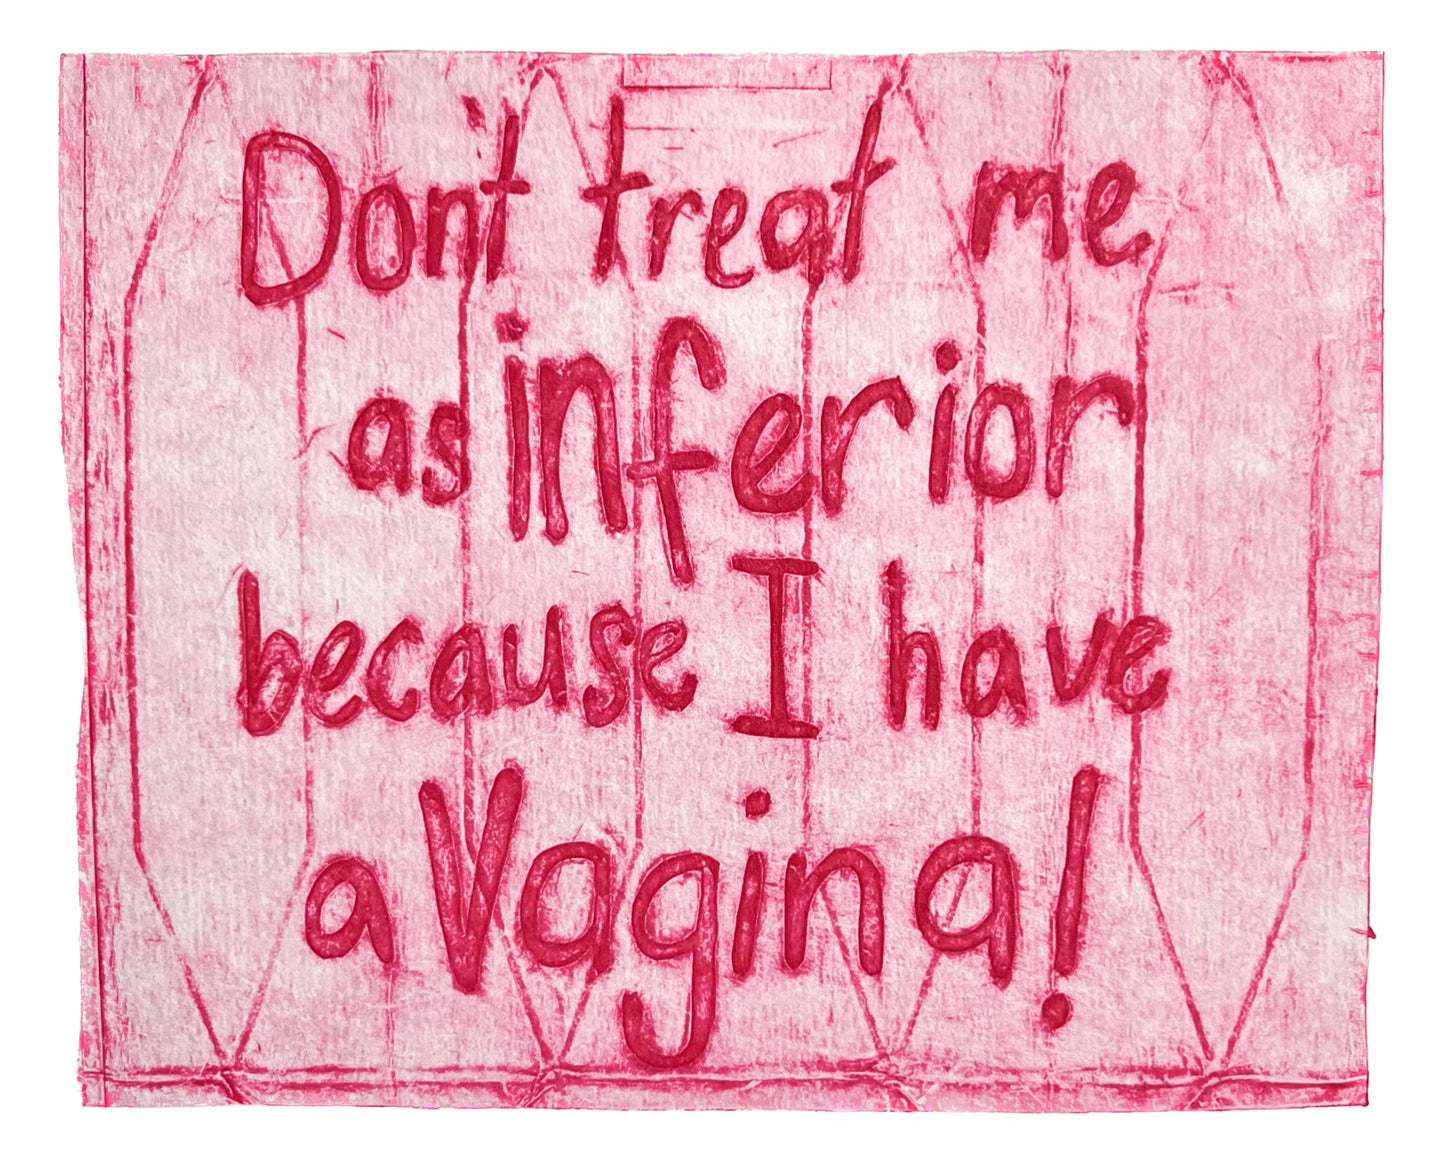 Don’t treat me as inferior because I have a Vagina!